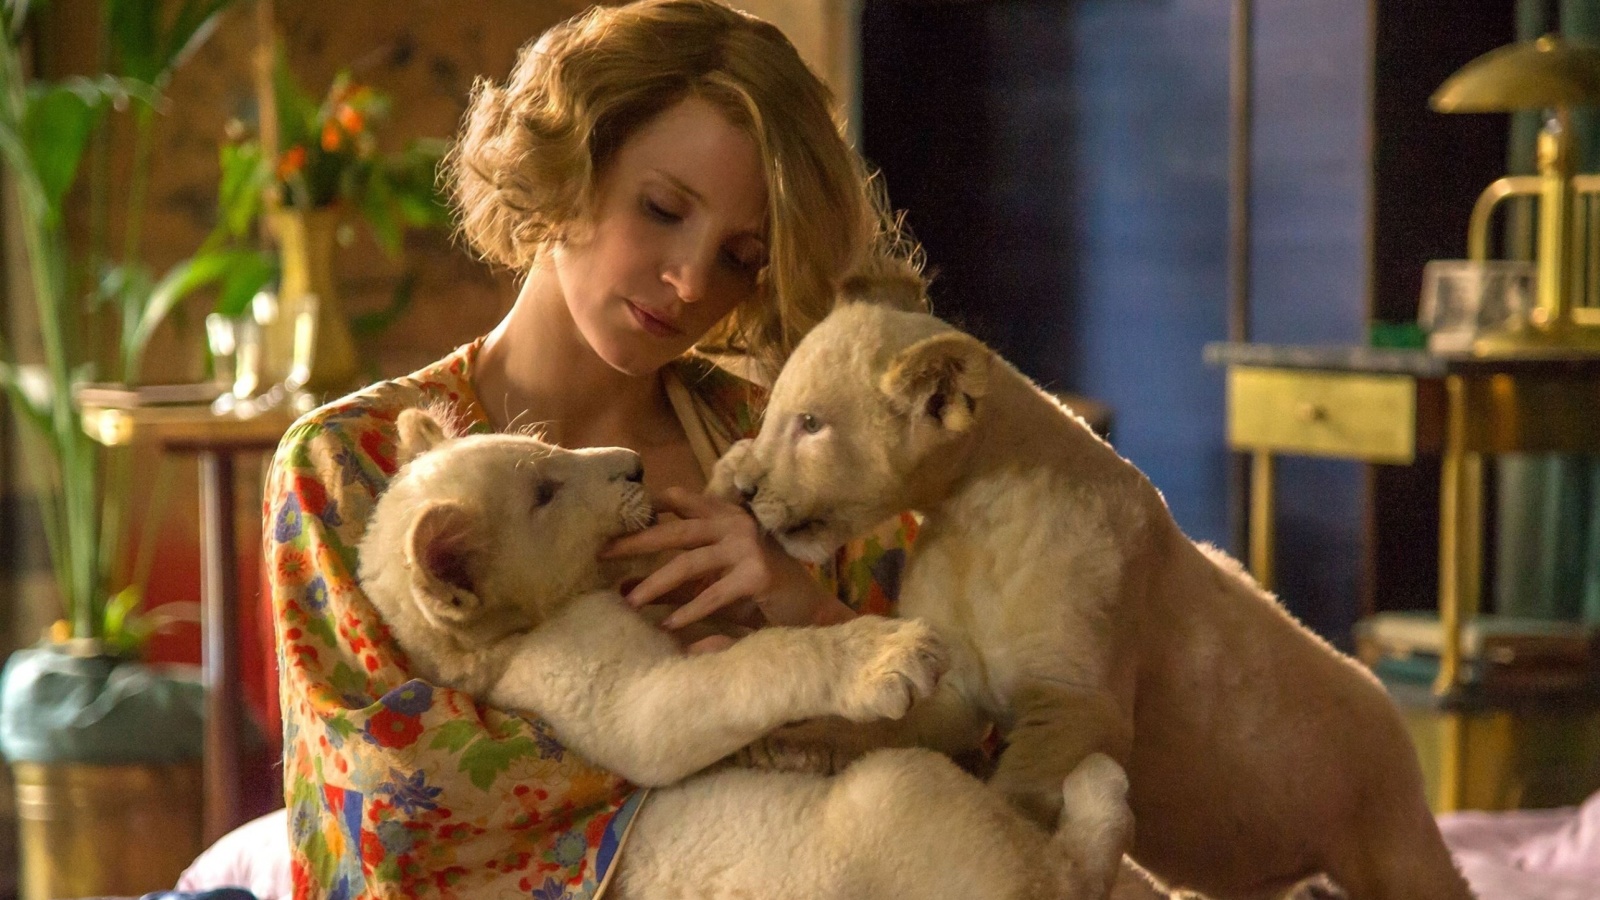 The Zookeepers Wife Film with Jessica Chastain screenshot #1 1600x900